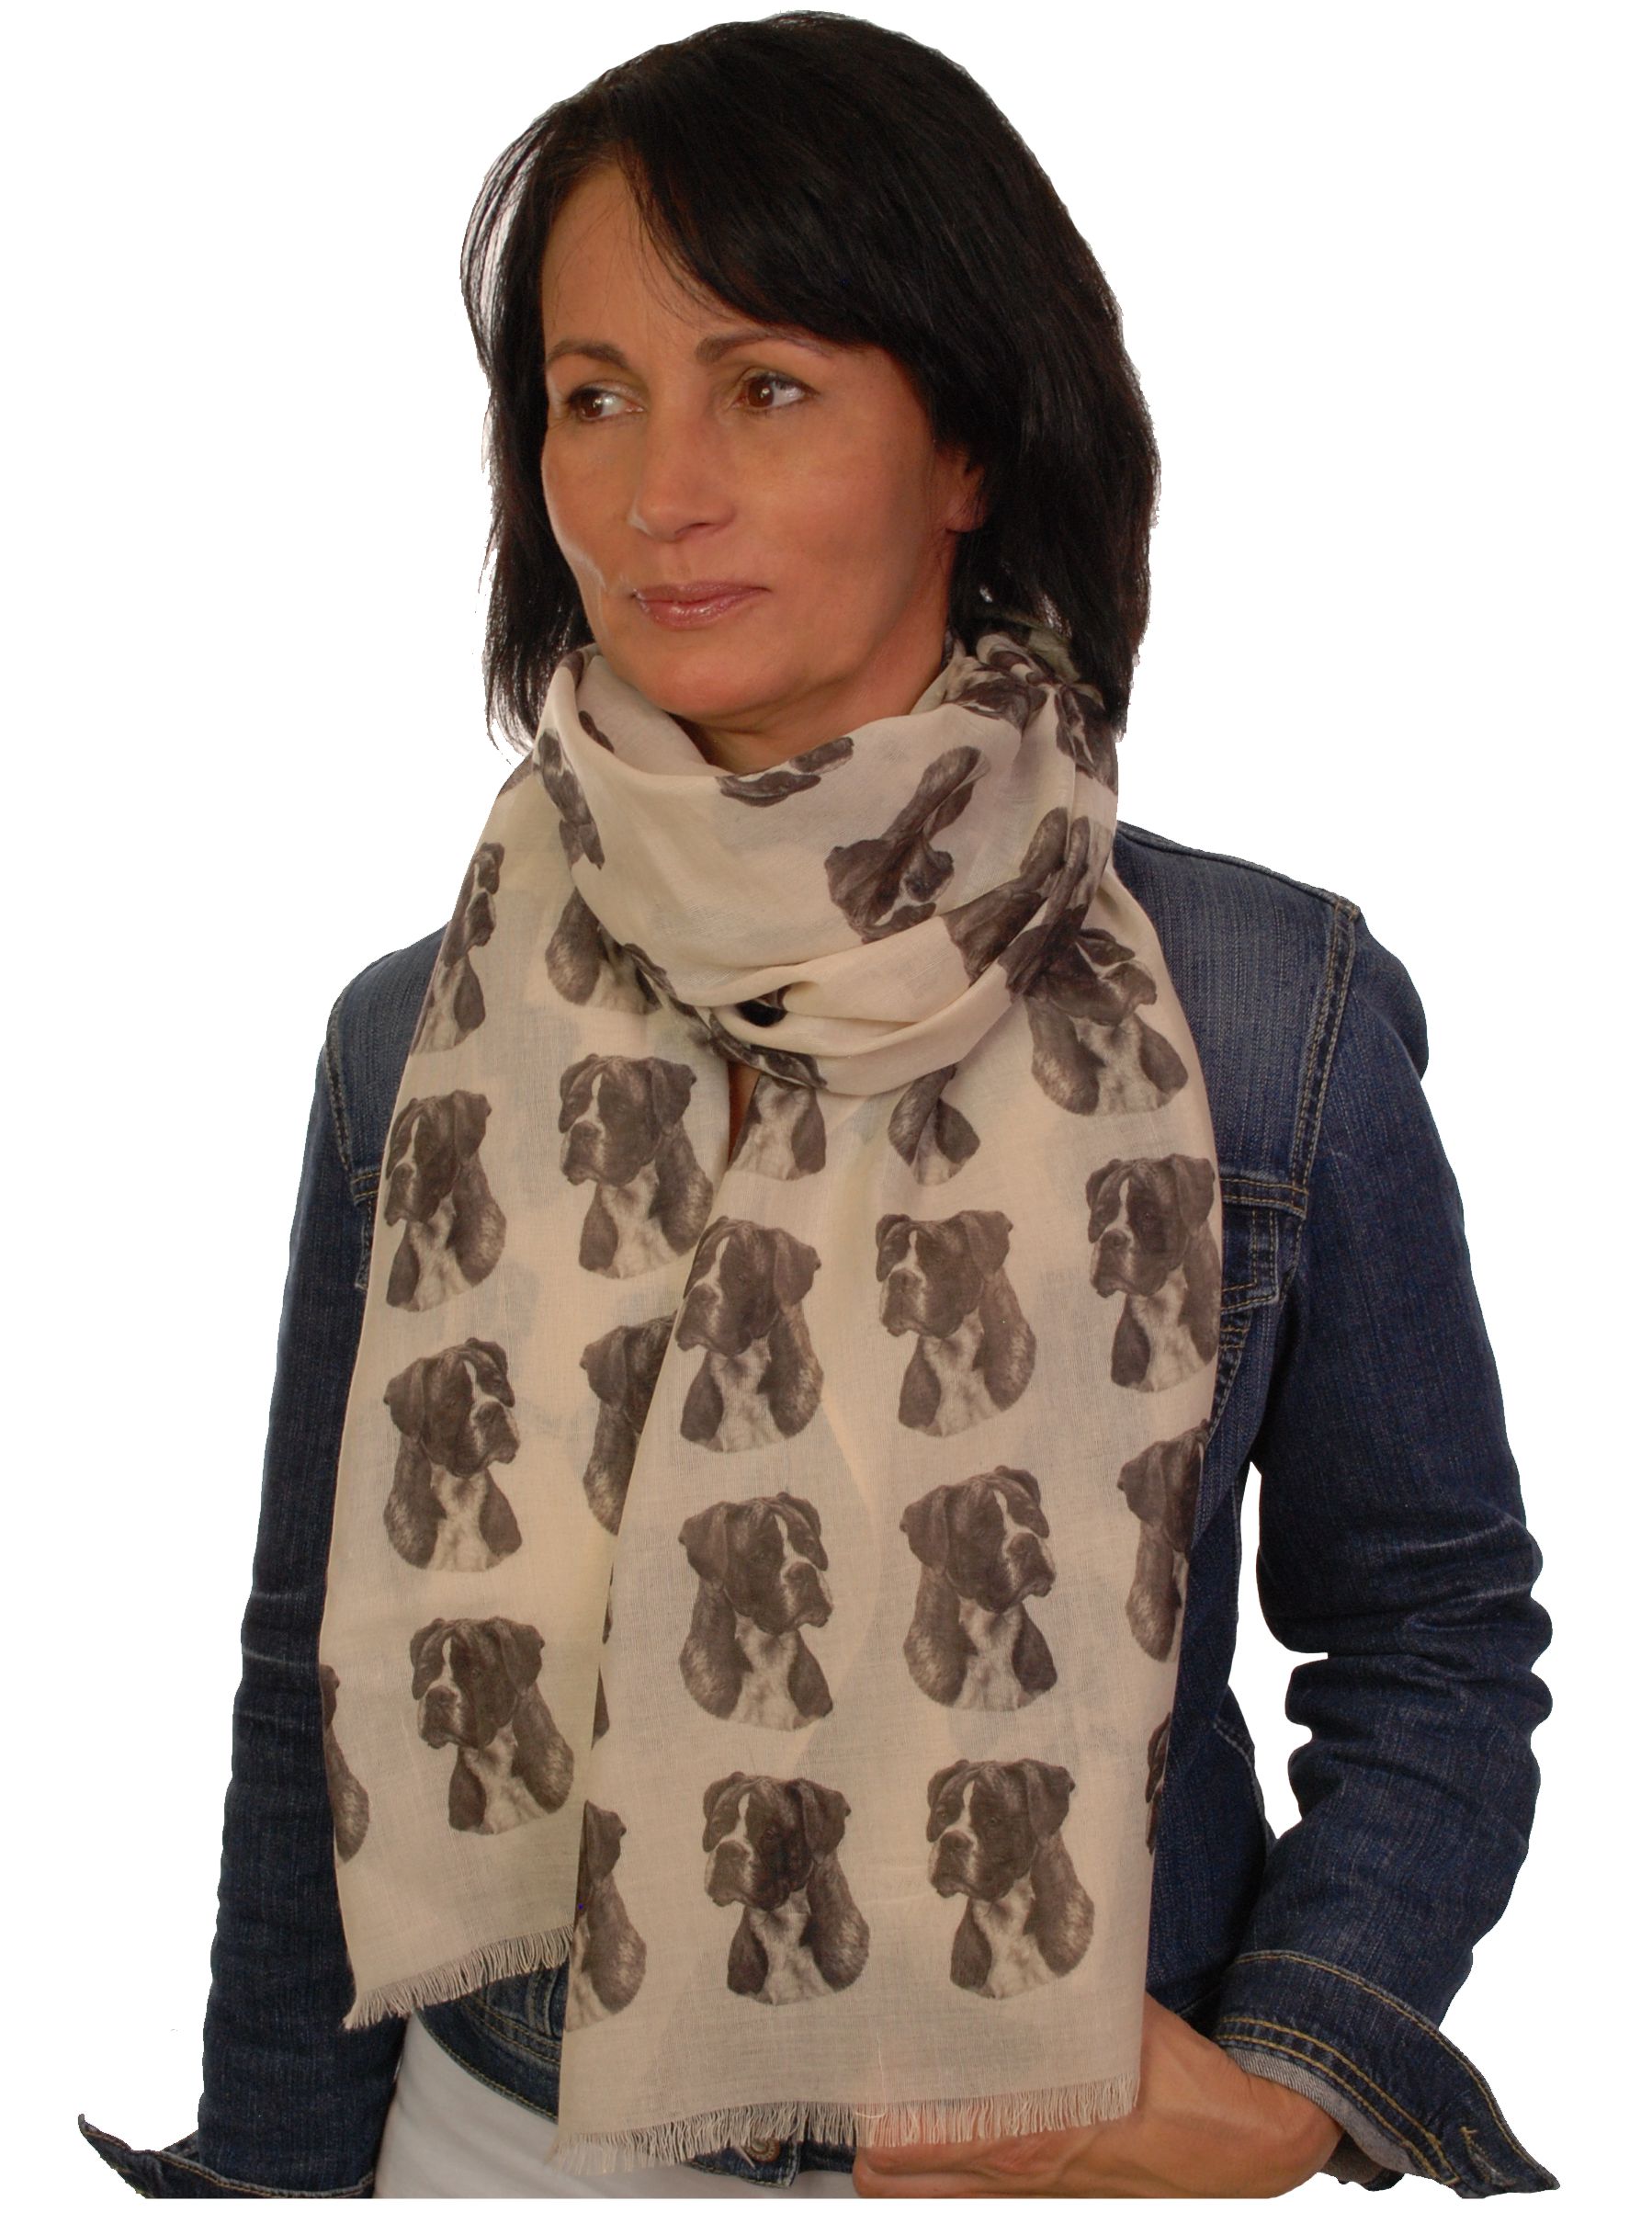 Mike Sibley Boxer licensed design ladies fashion scarf